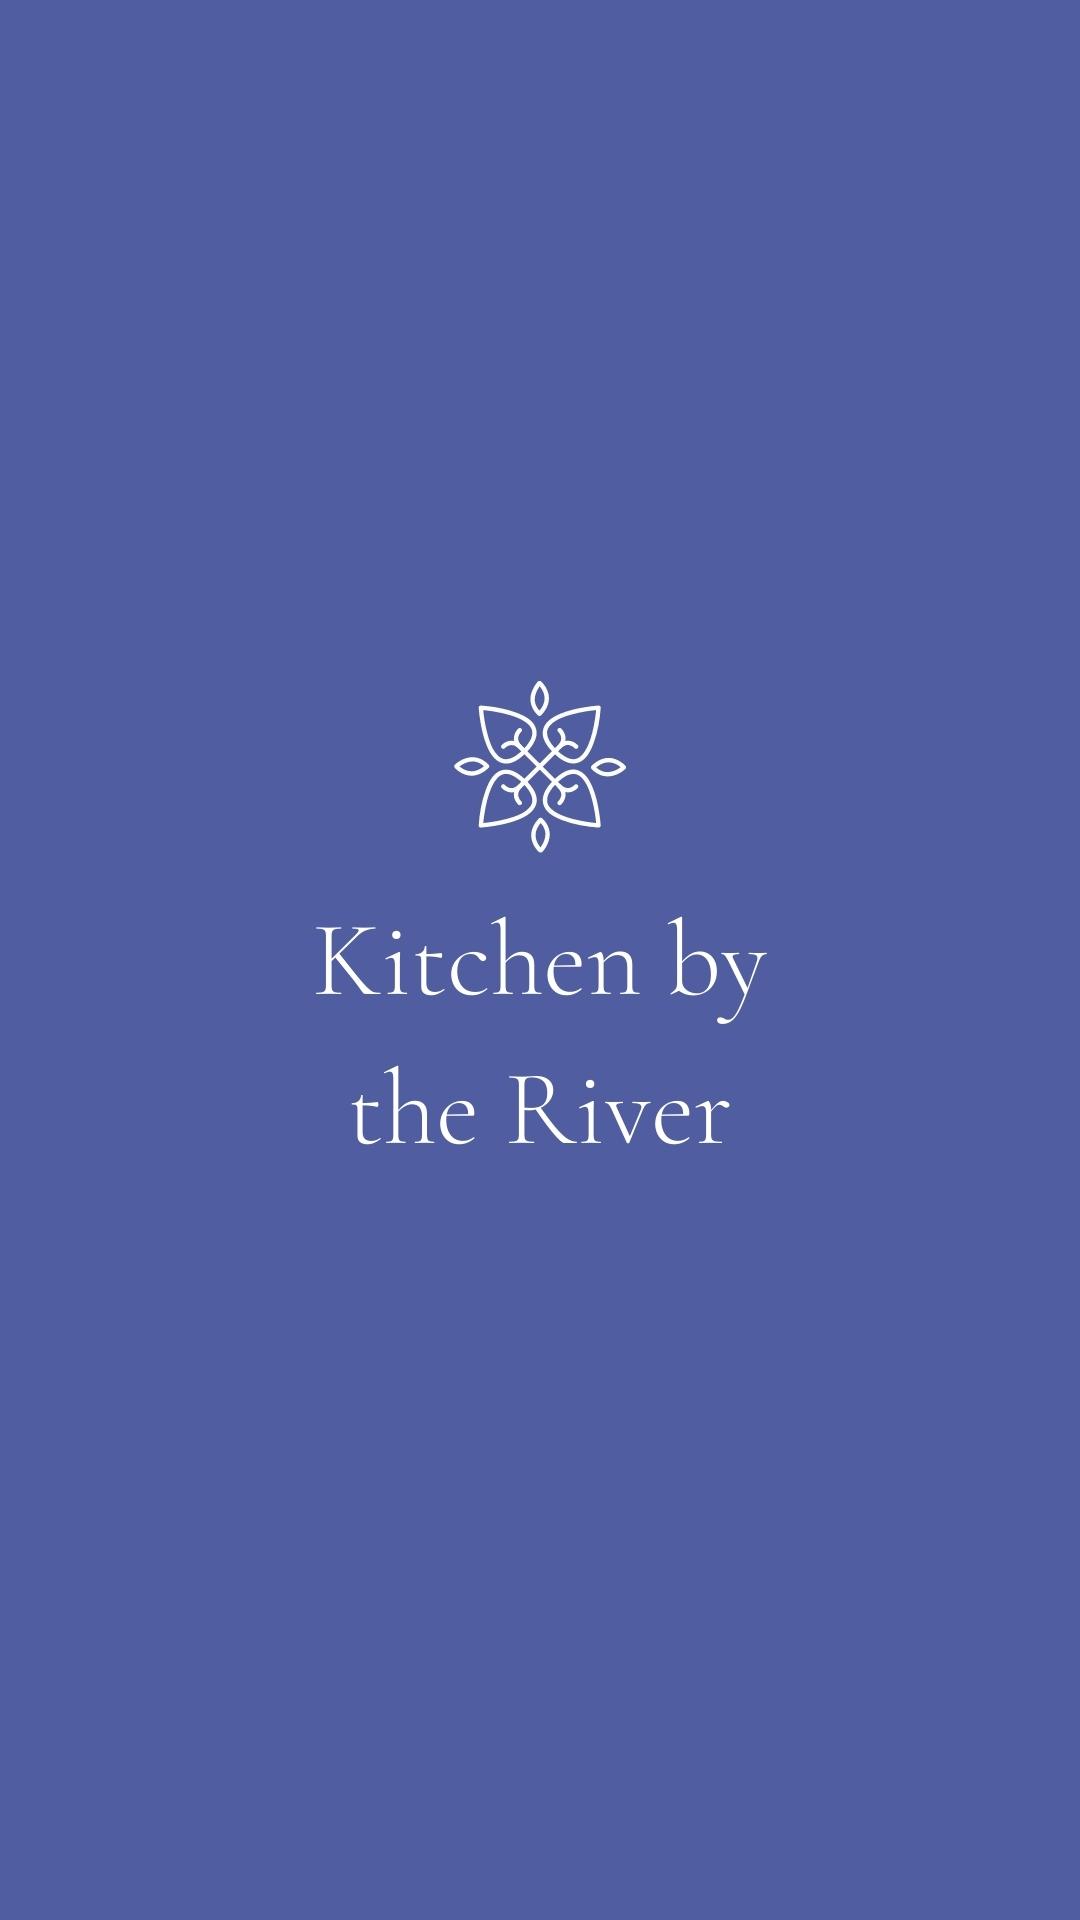 Kitchen by the river